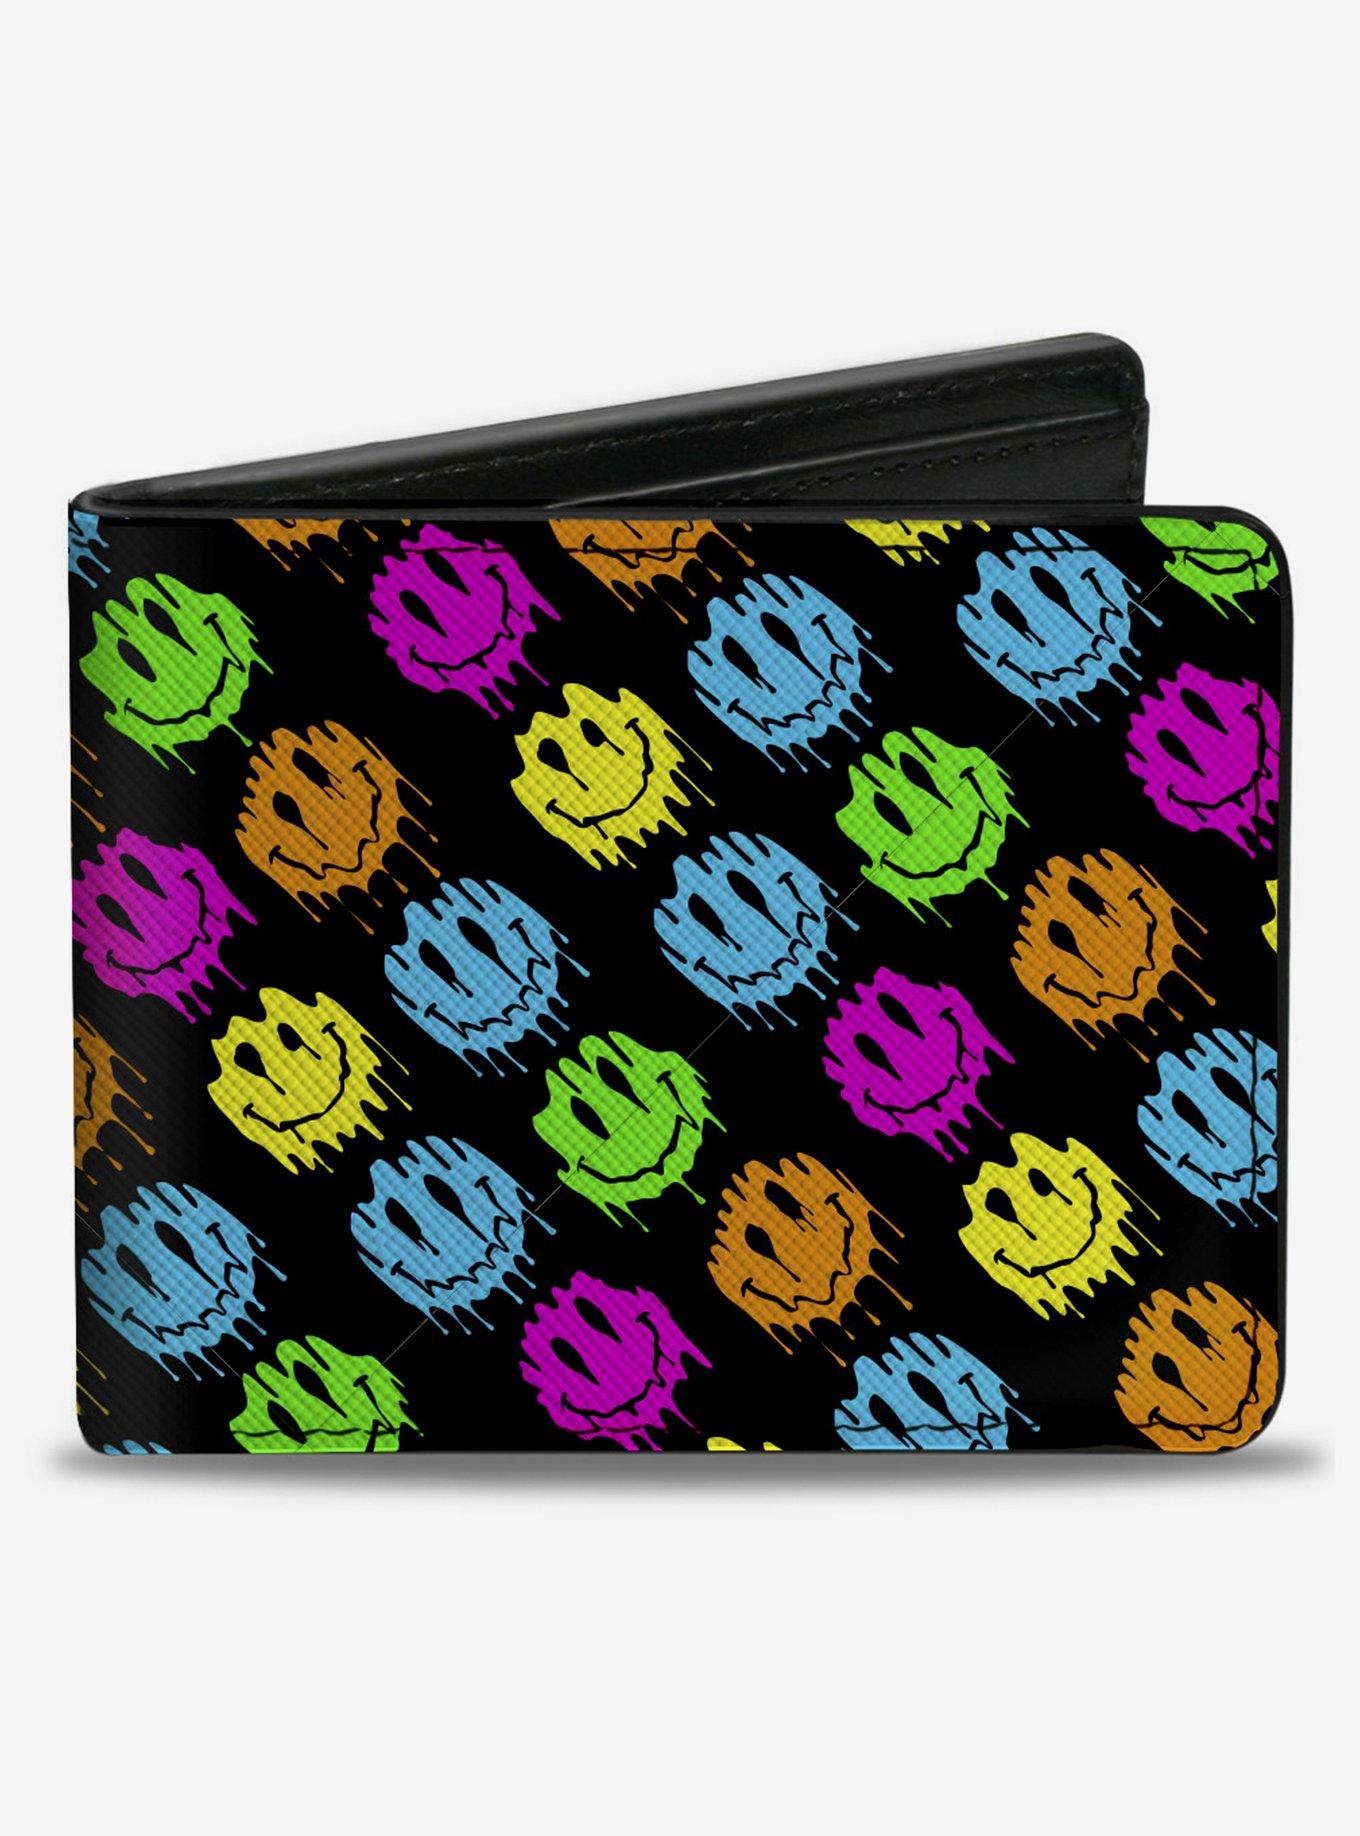 Smiley Faces Melted Mini Repeat Angle Bifold Wallet